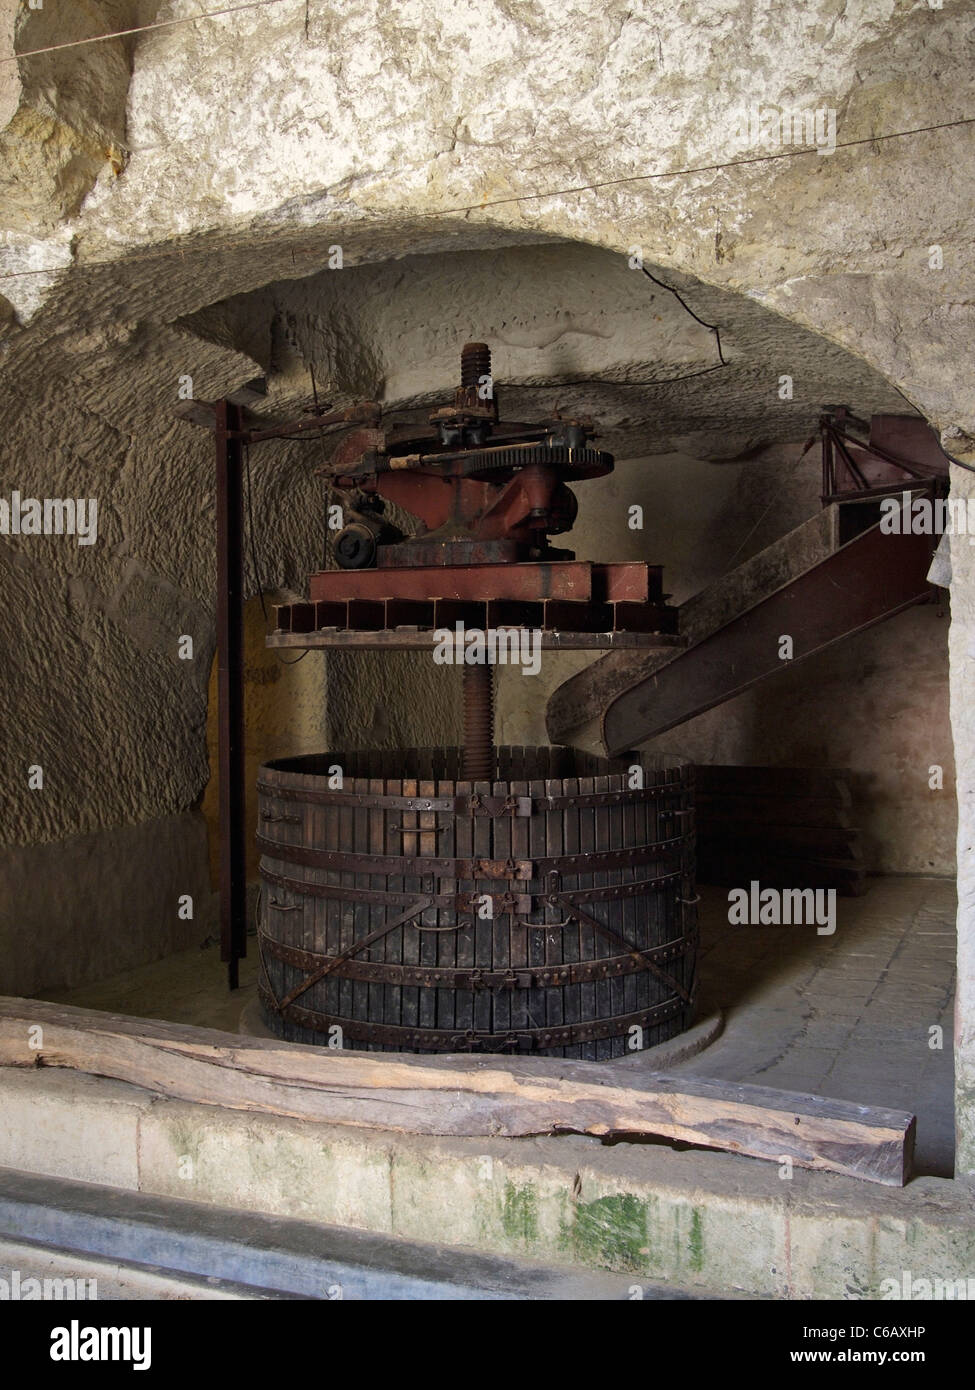 The Chateau de Brézé has an underground grape-press directly under the vineyards. Loire valley, France. It was used until 1976. Stock Photo